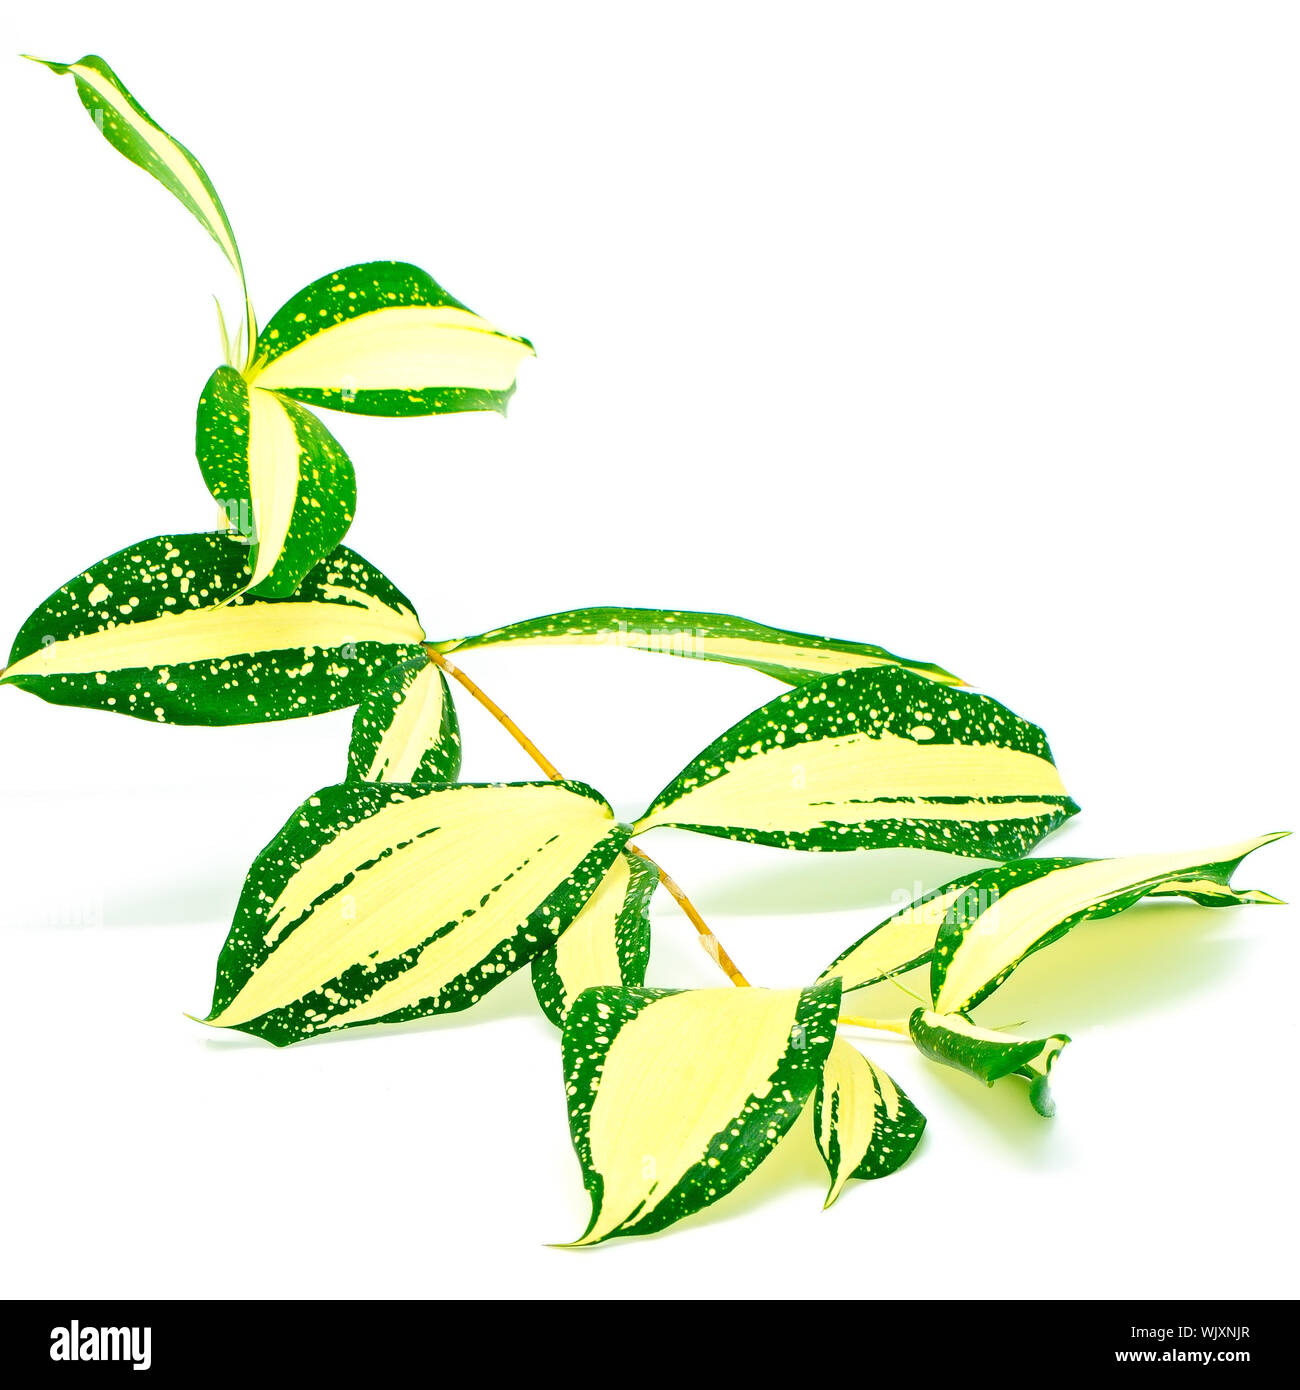 Foliage leaves of dracaena, Gold Dust dracaena or Spotted dracaena, stripped form, isolated on a white background Stock Photo